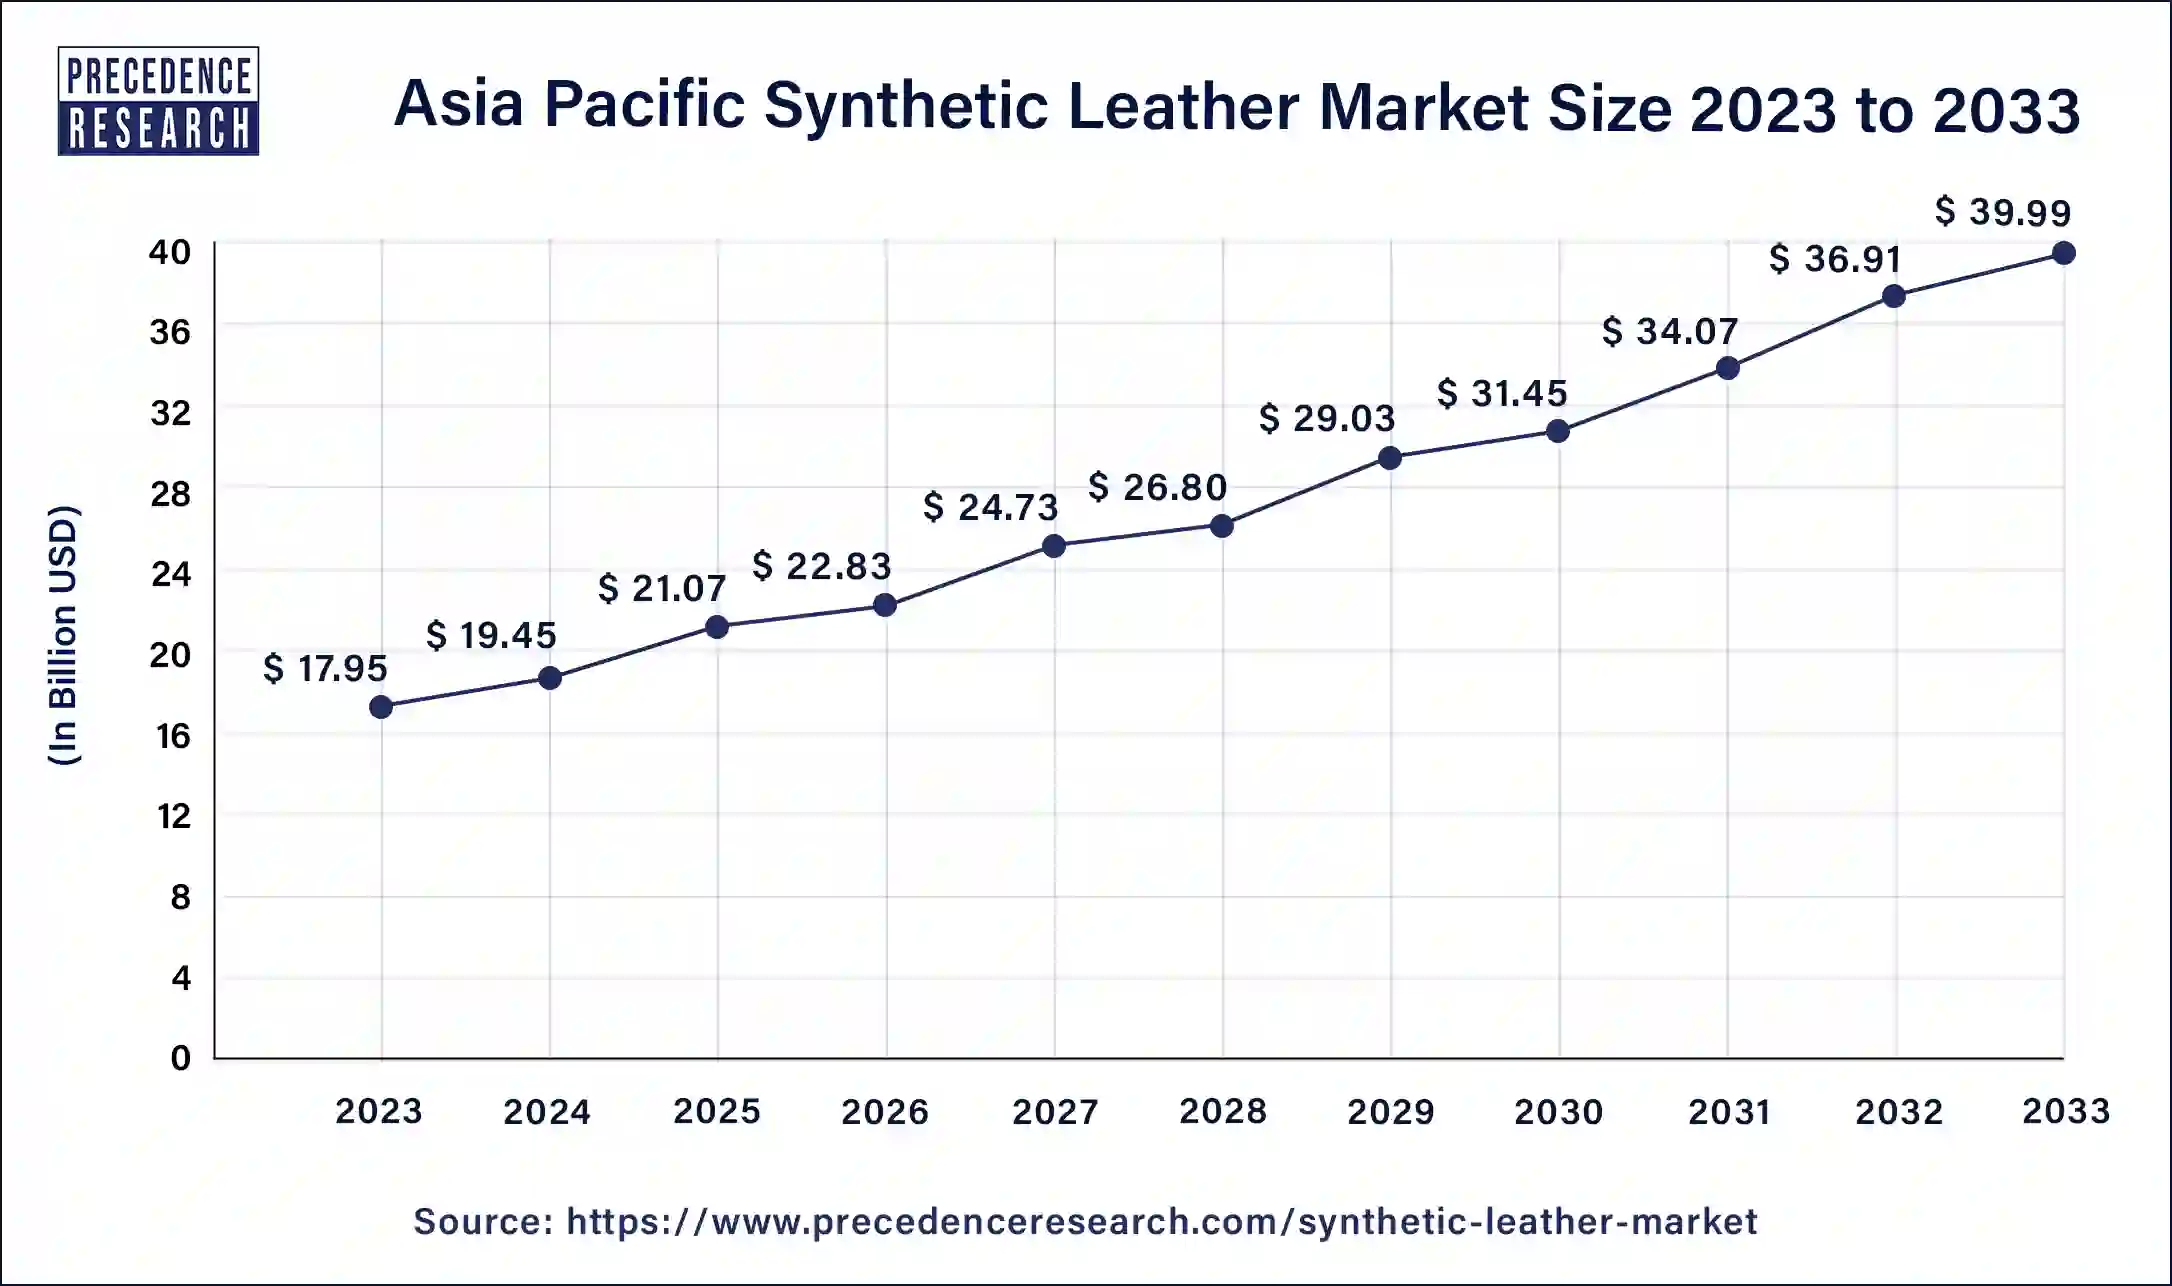 Asia Pacific Synthetic Leather Market Size 2024 to 2033